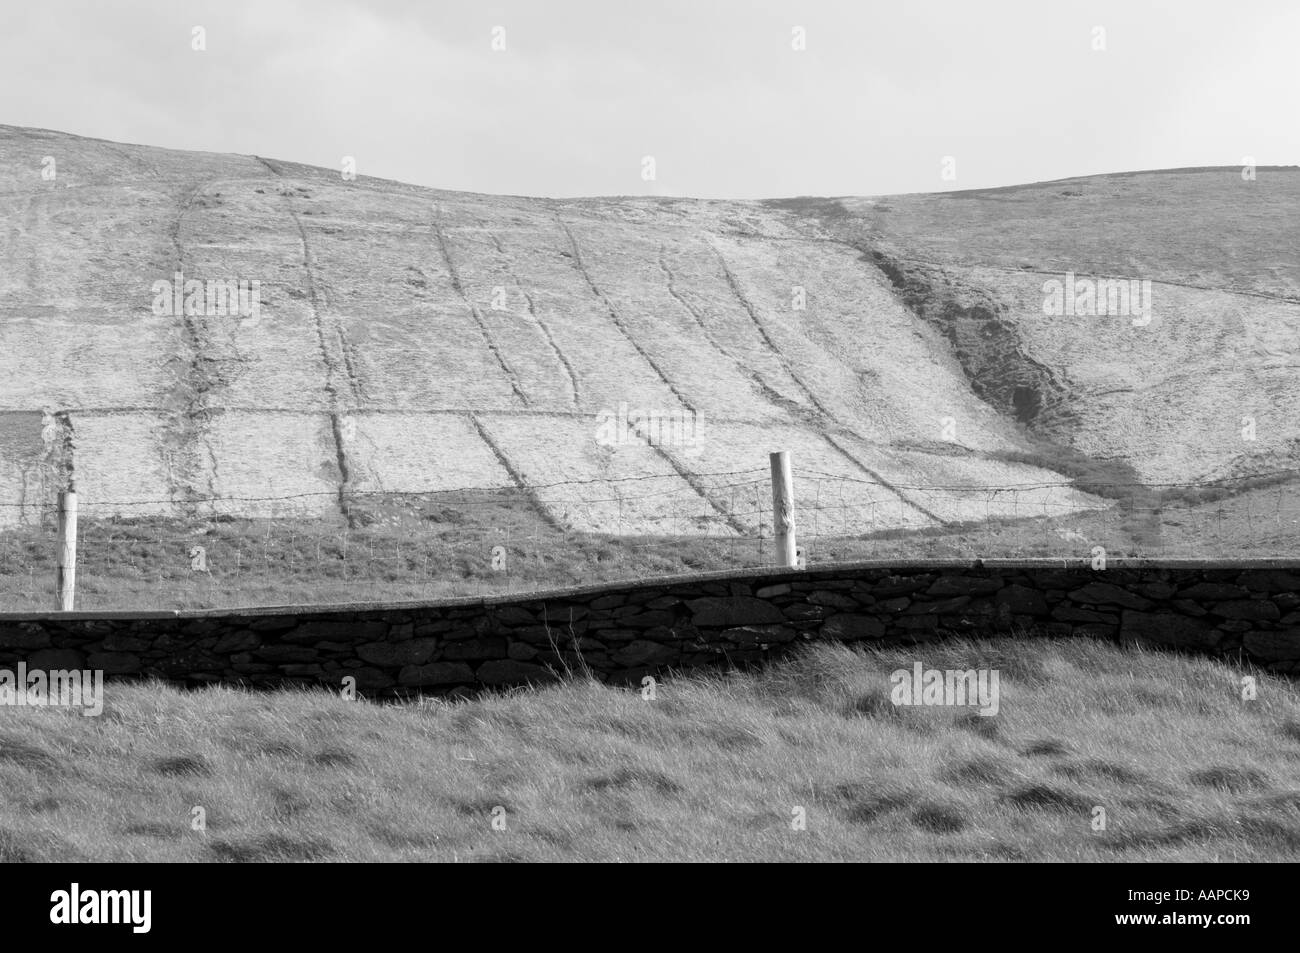 Graphic image of rock wall, fencing, fields and hills, Dingle peninsula, County Kerry, Republic of Ireland Stock Photo